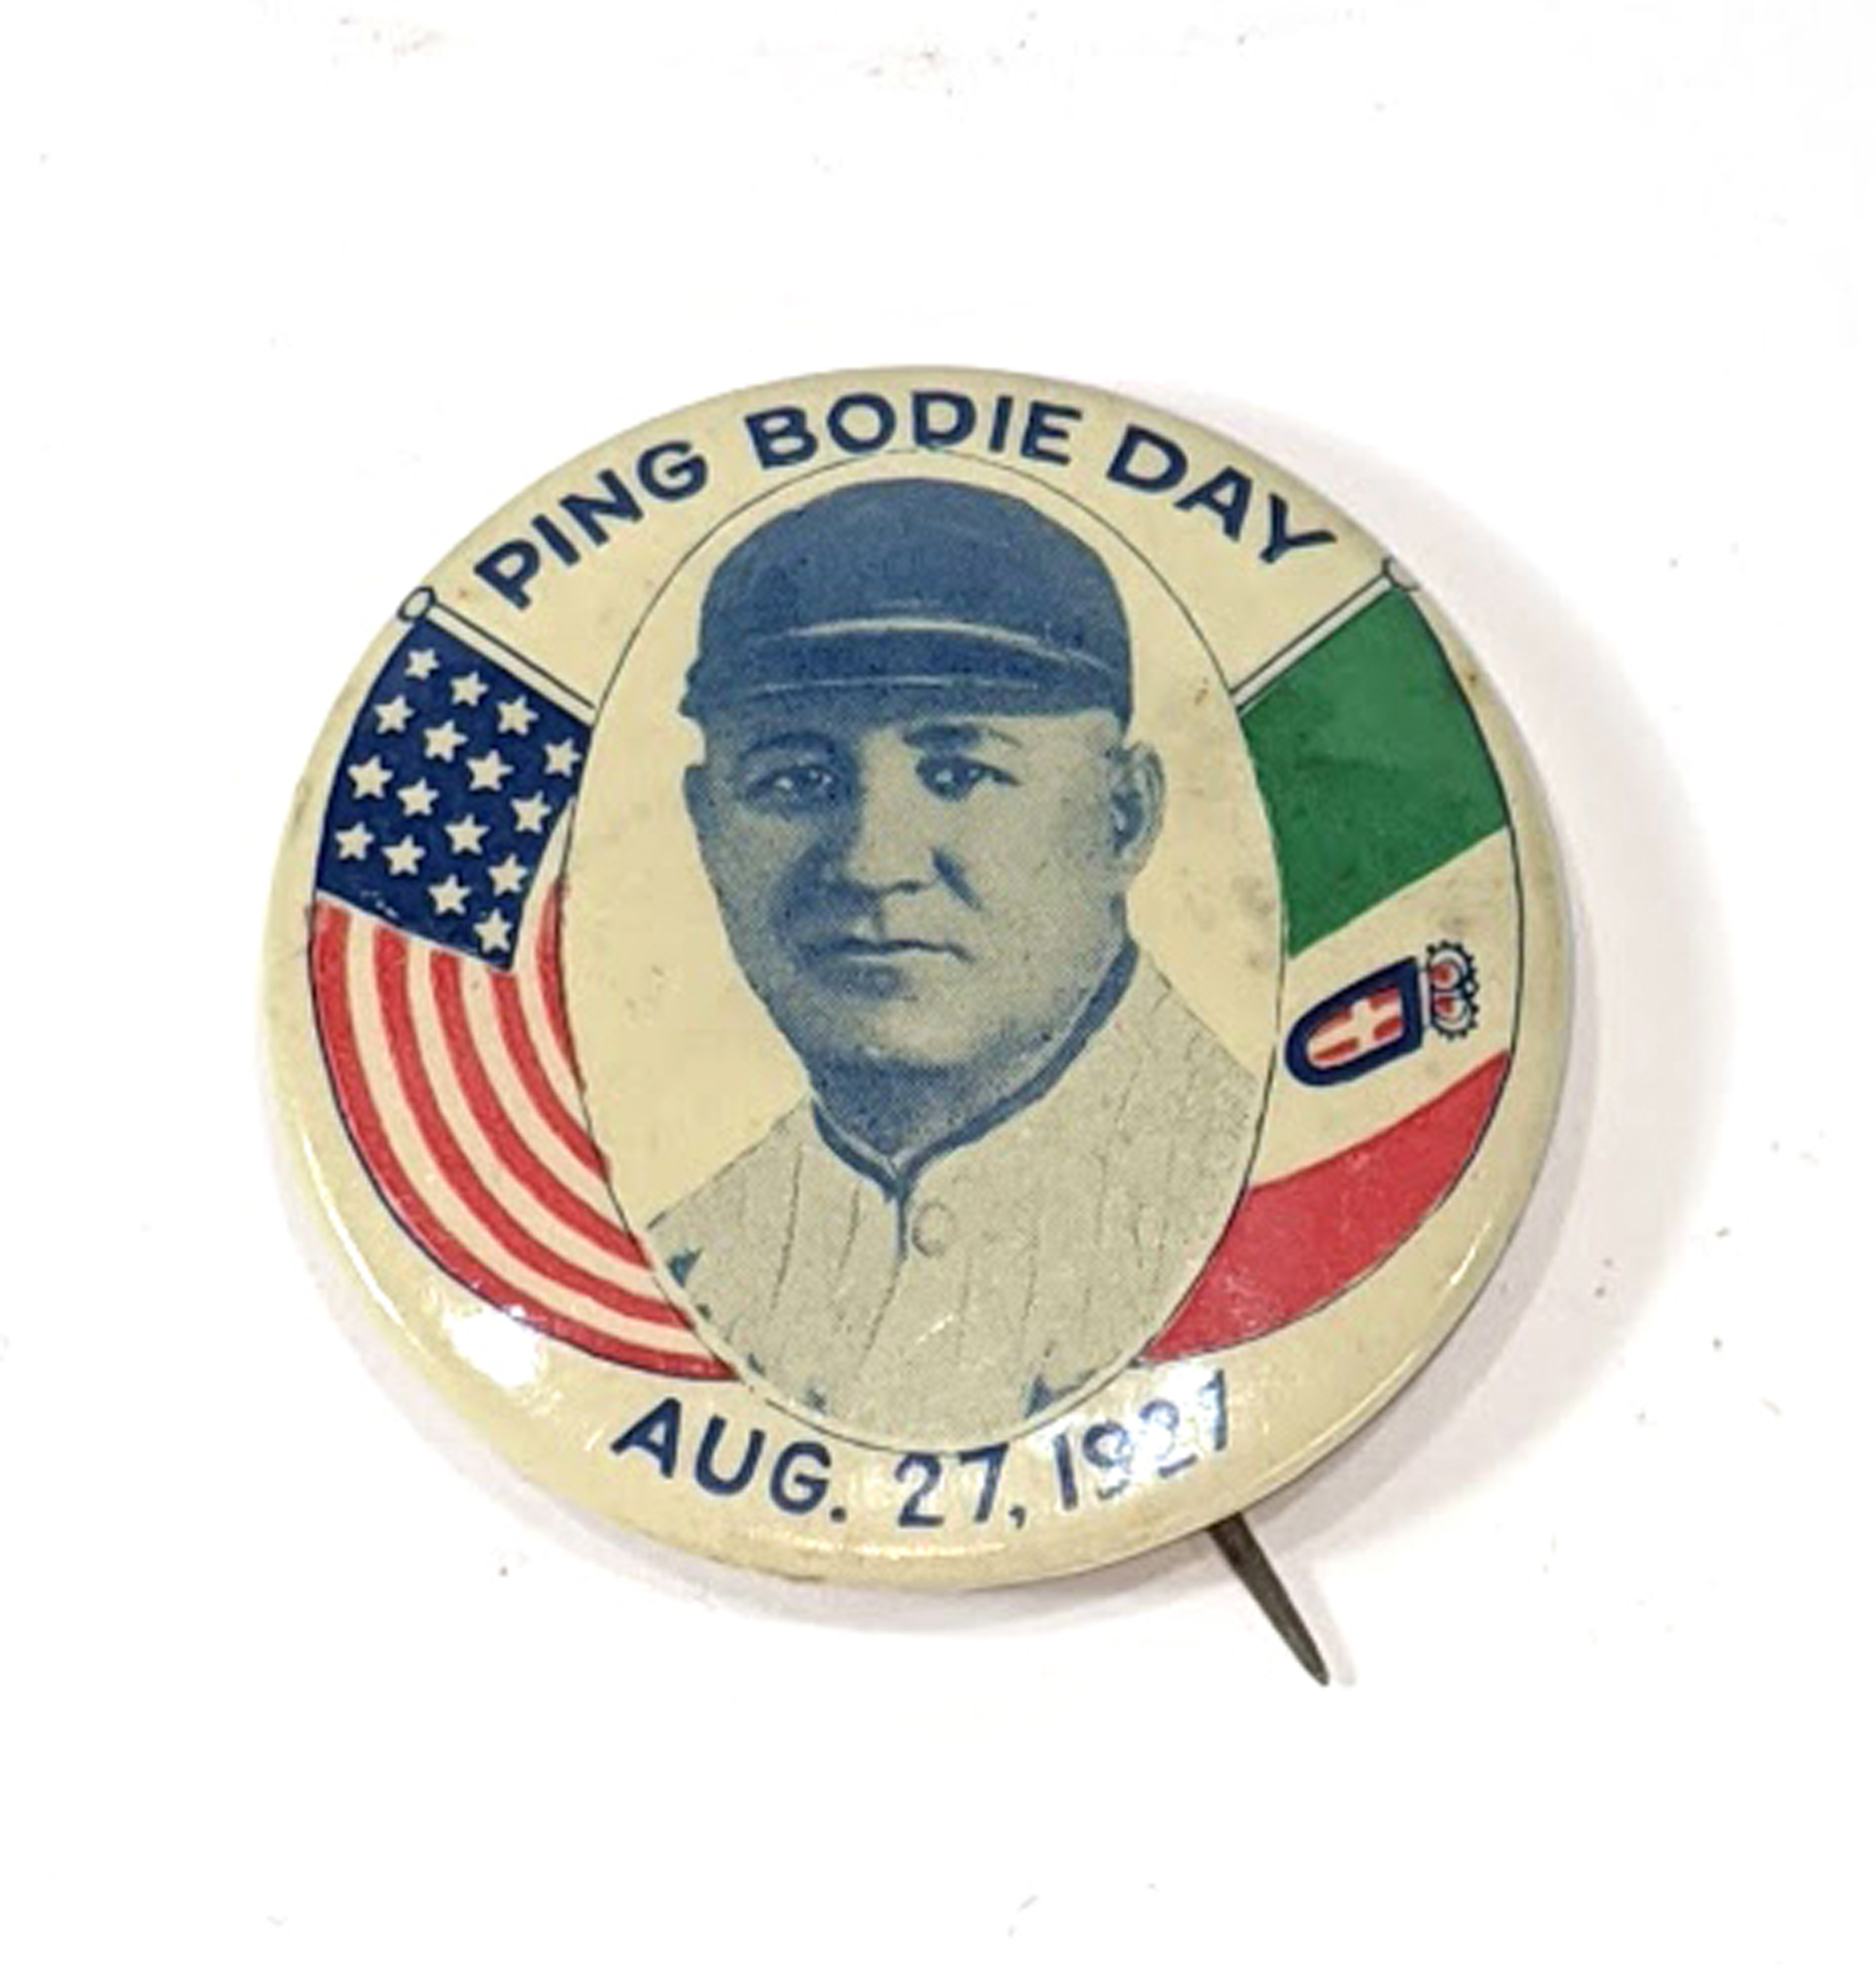 Rare 1927 Ping Bodie Day pinback dated August 27